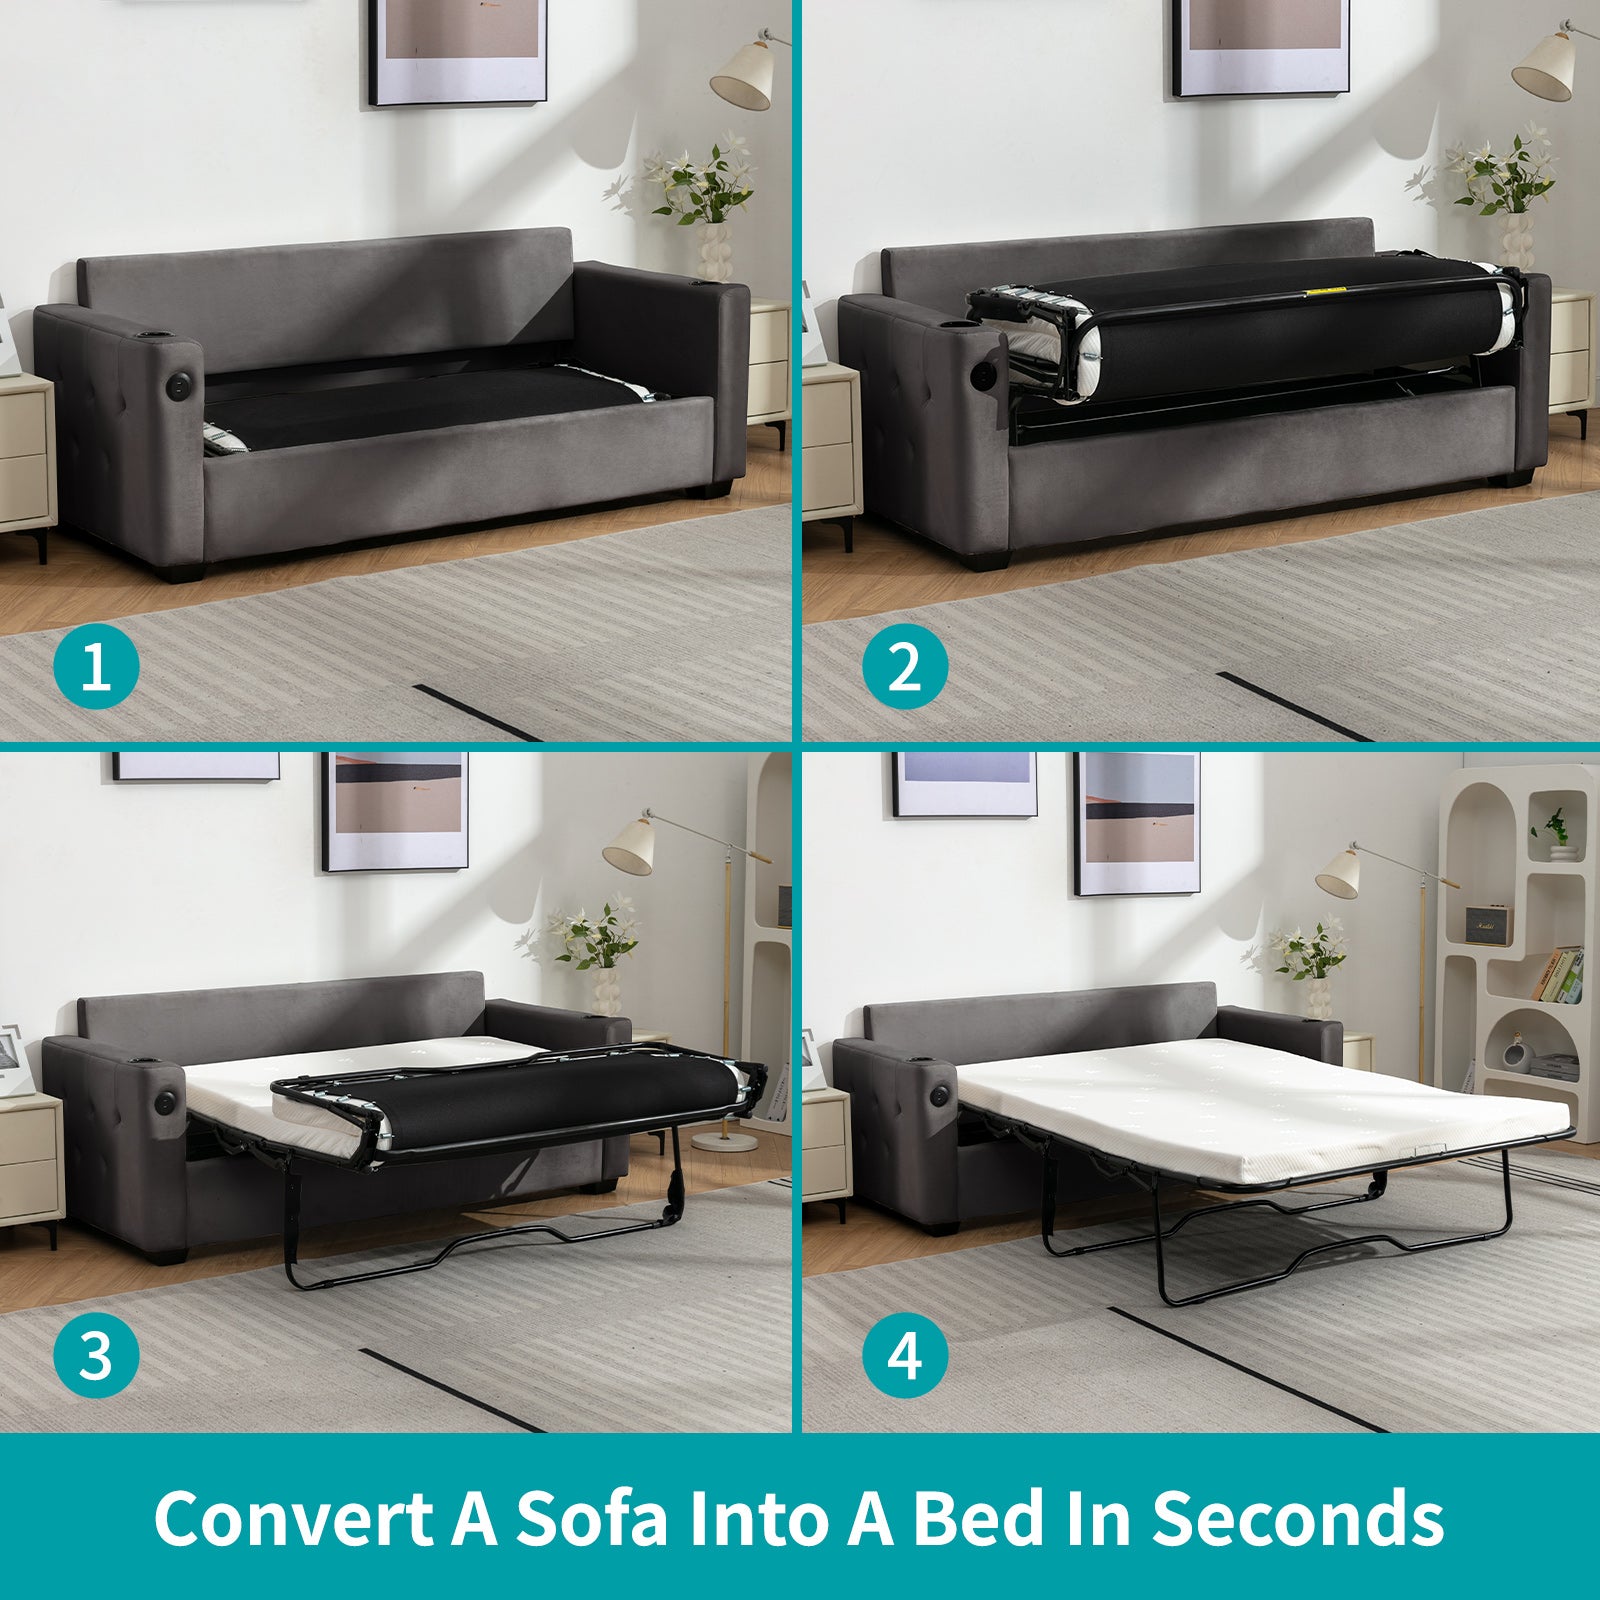 Cecer 2-in-1 Convertible Sleeper Sofa Bed,Pull Out Sofa Bed,Daybed with Memory Foam Mattress, USB Ports & Cup Holder-Perfect for Living Room